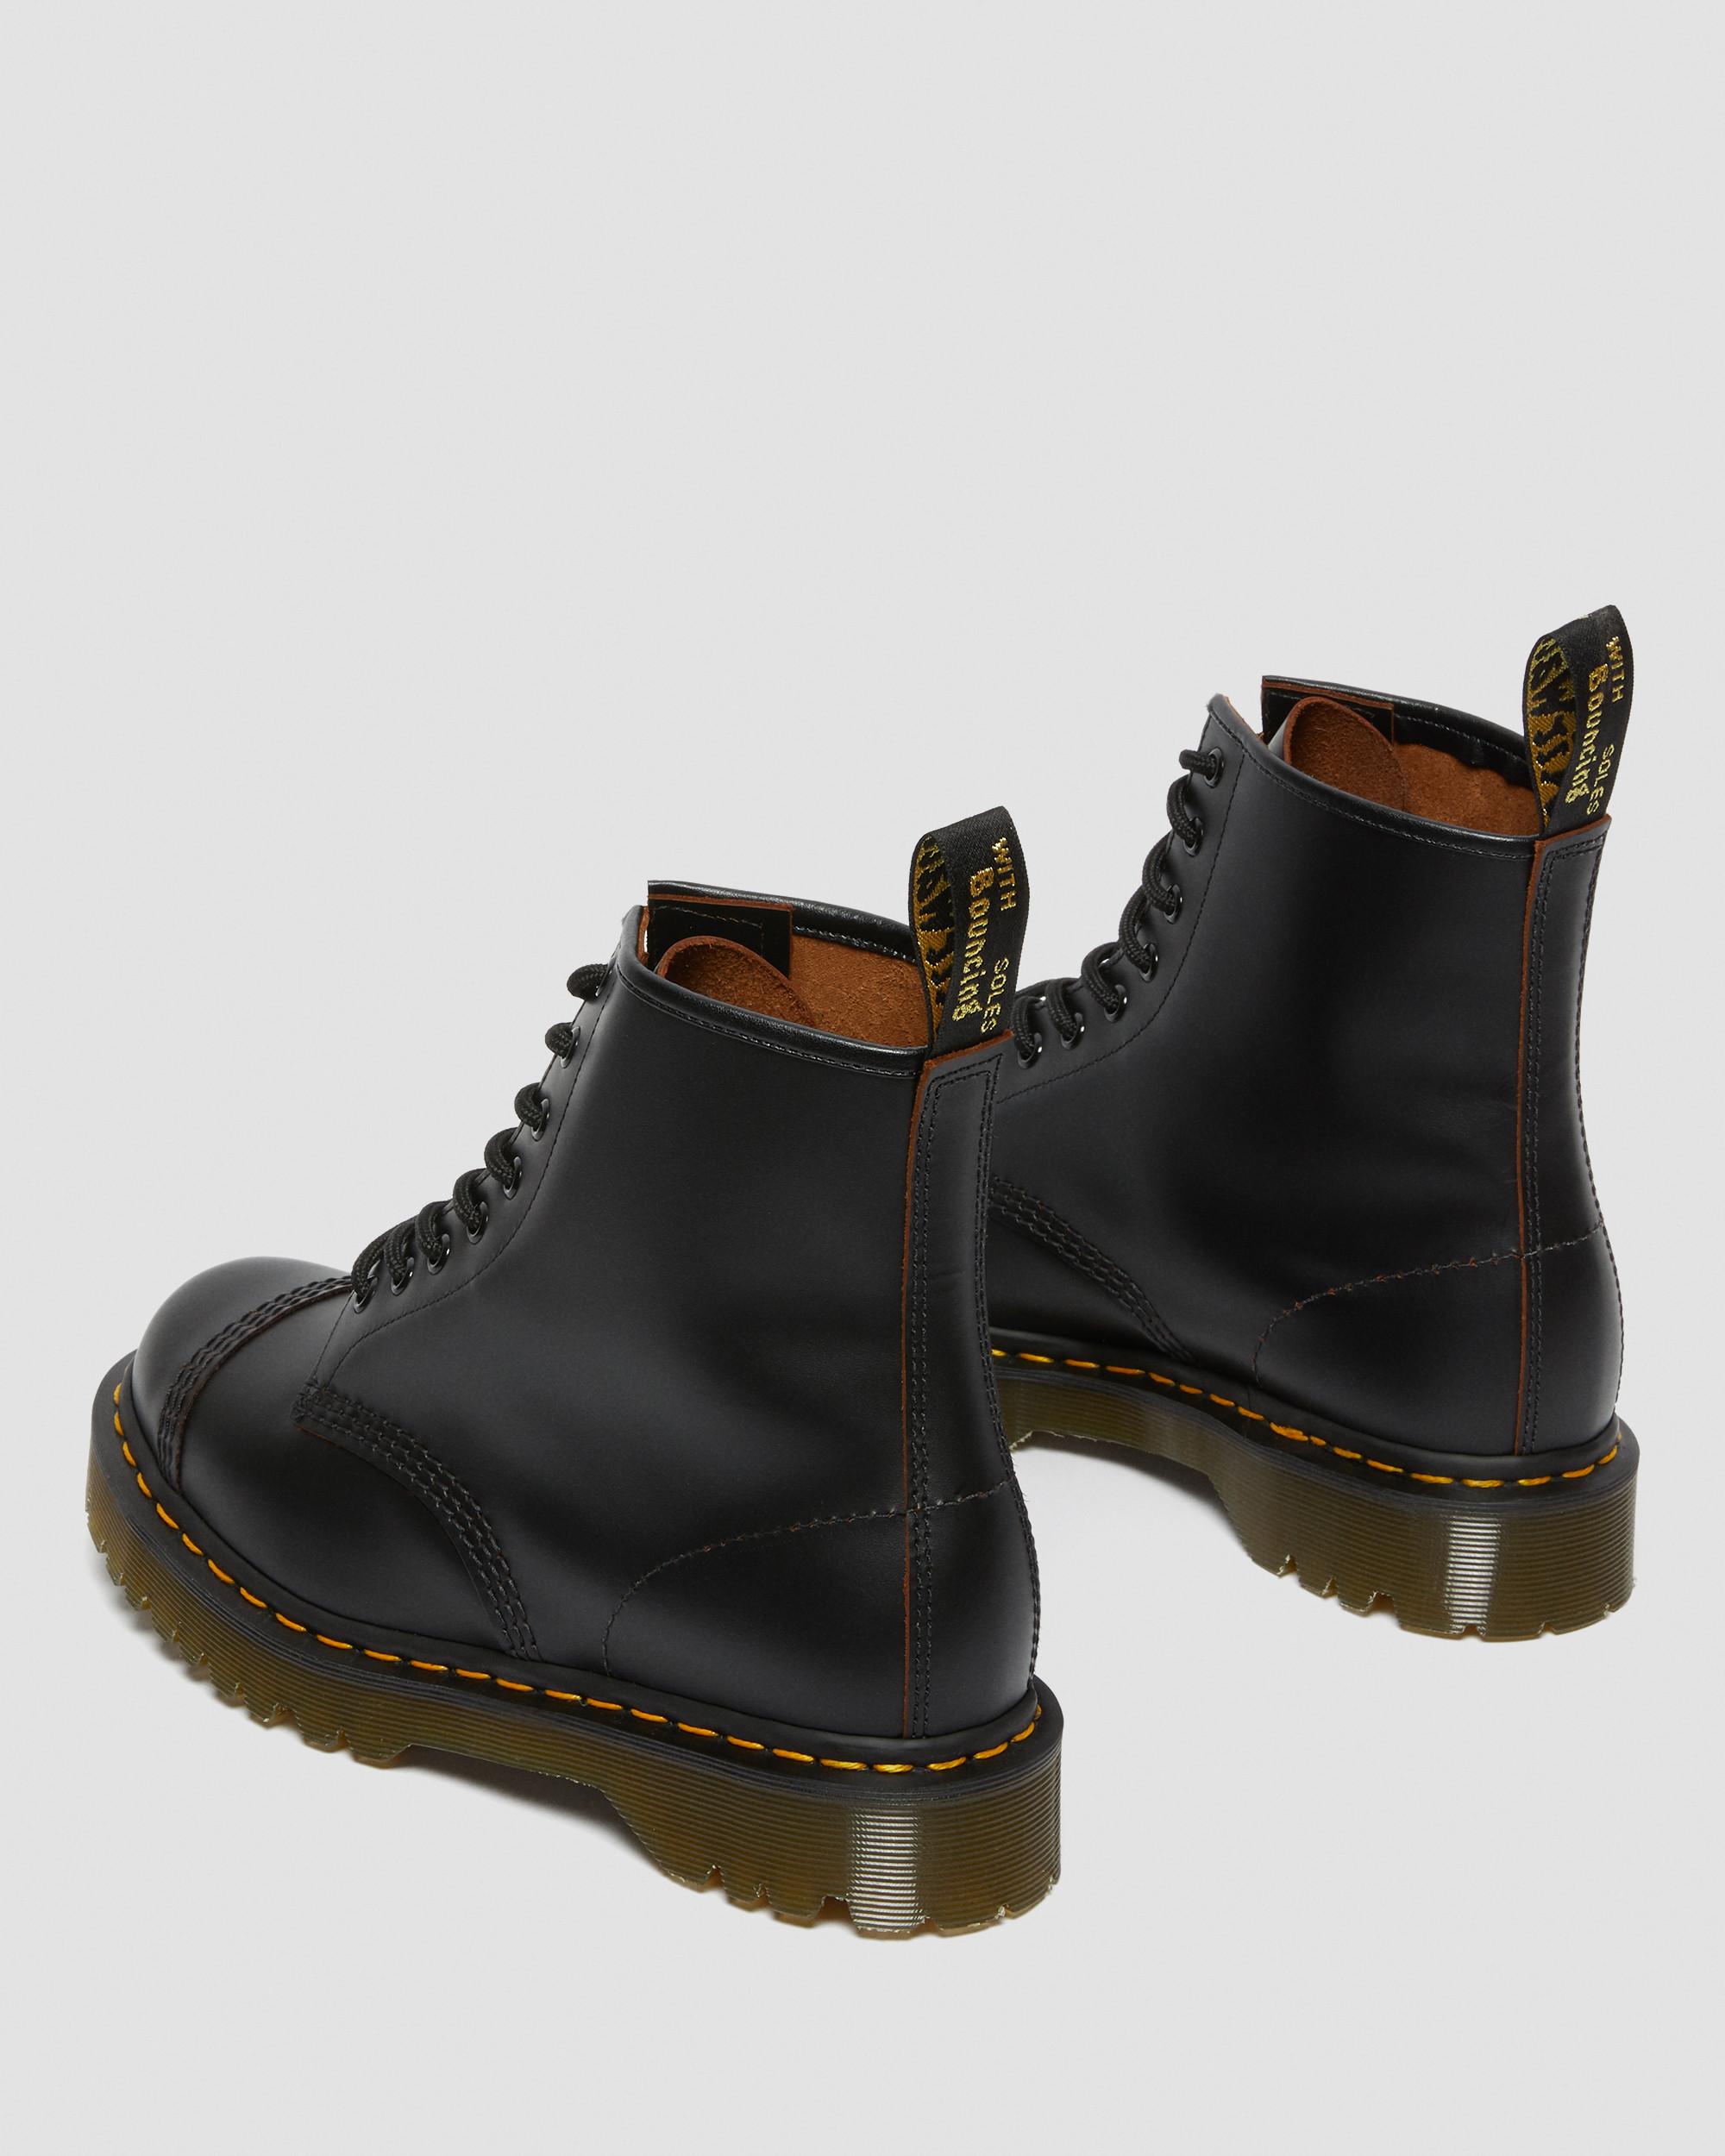 1460 Bex Made in England Toe Cap Lace Up Boots in Black | Dr. Martens